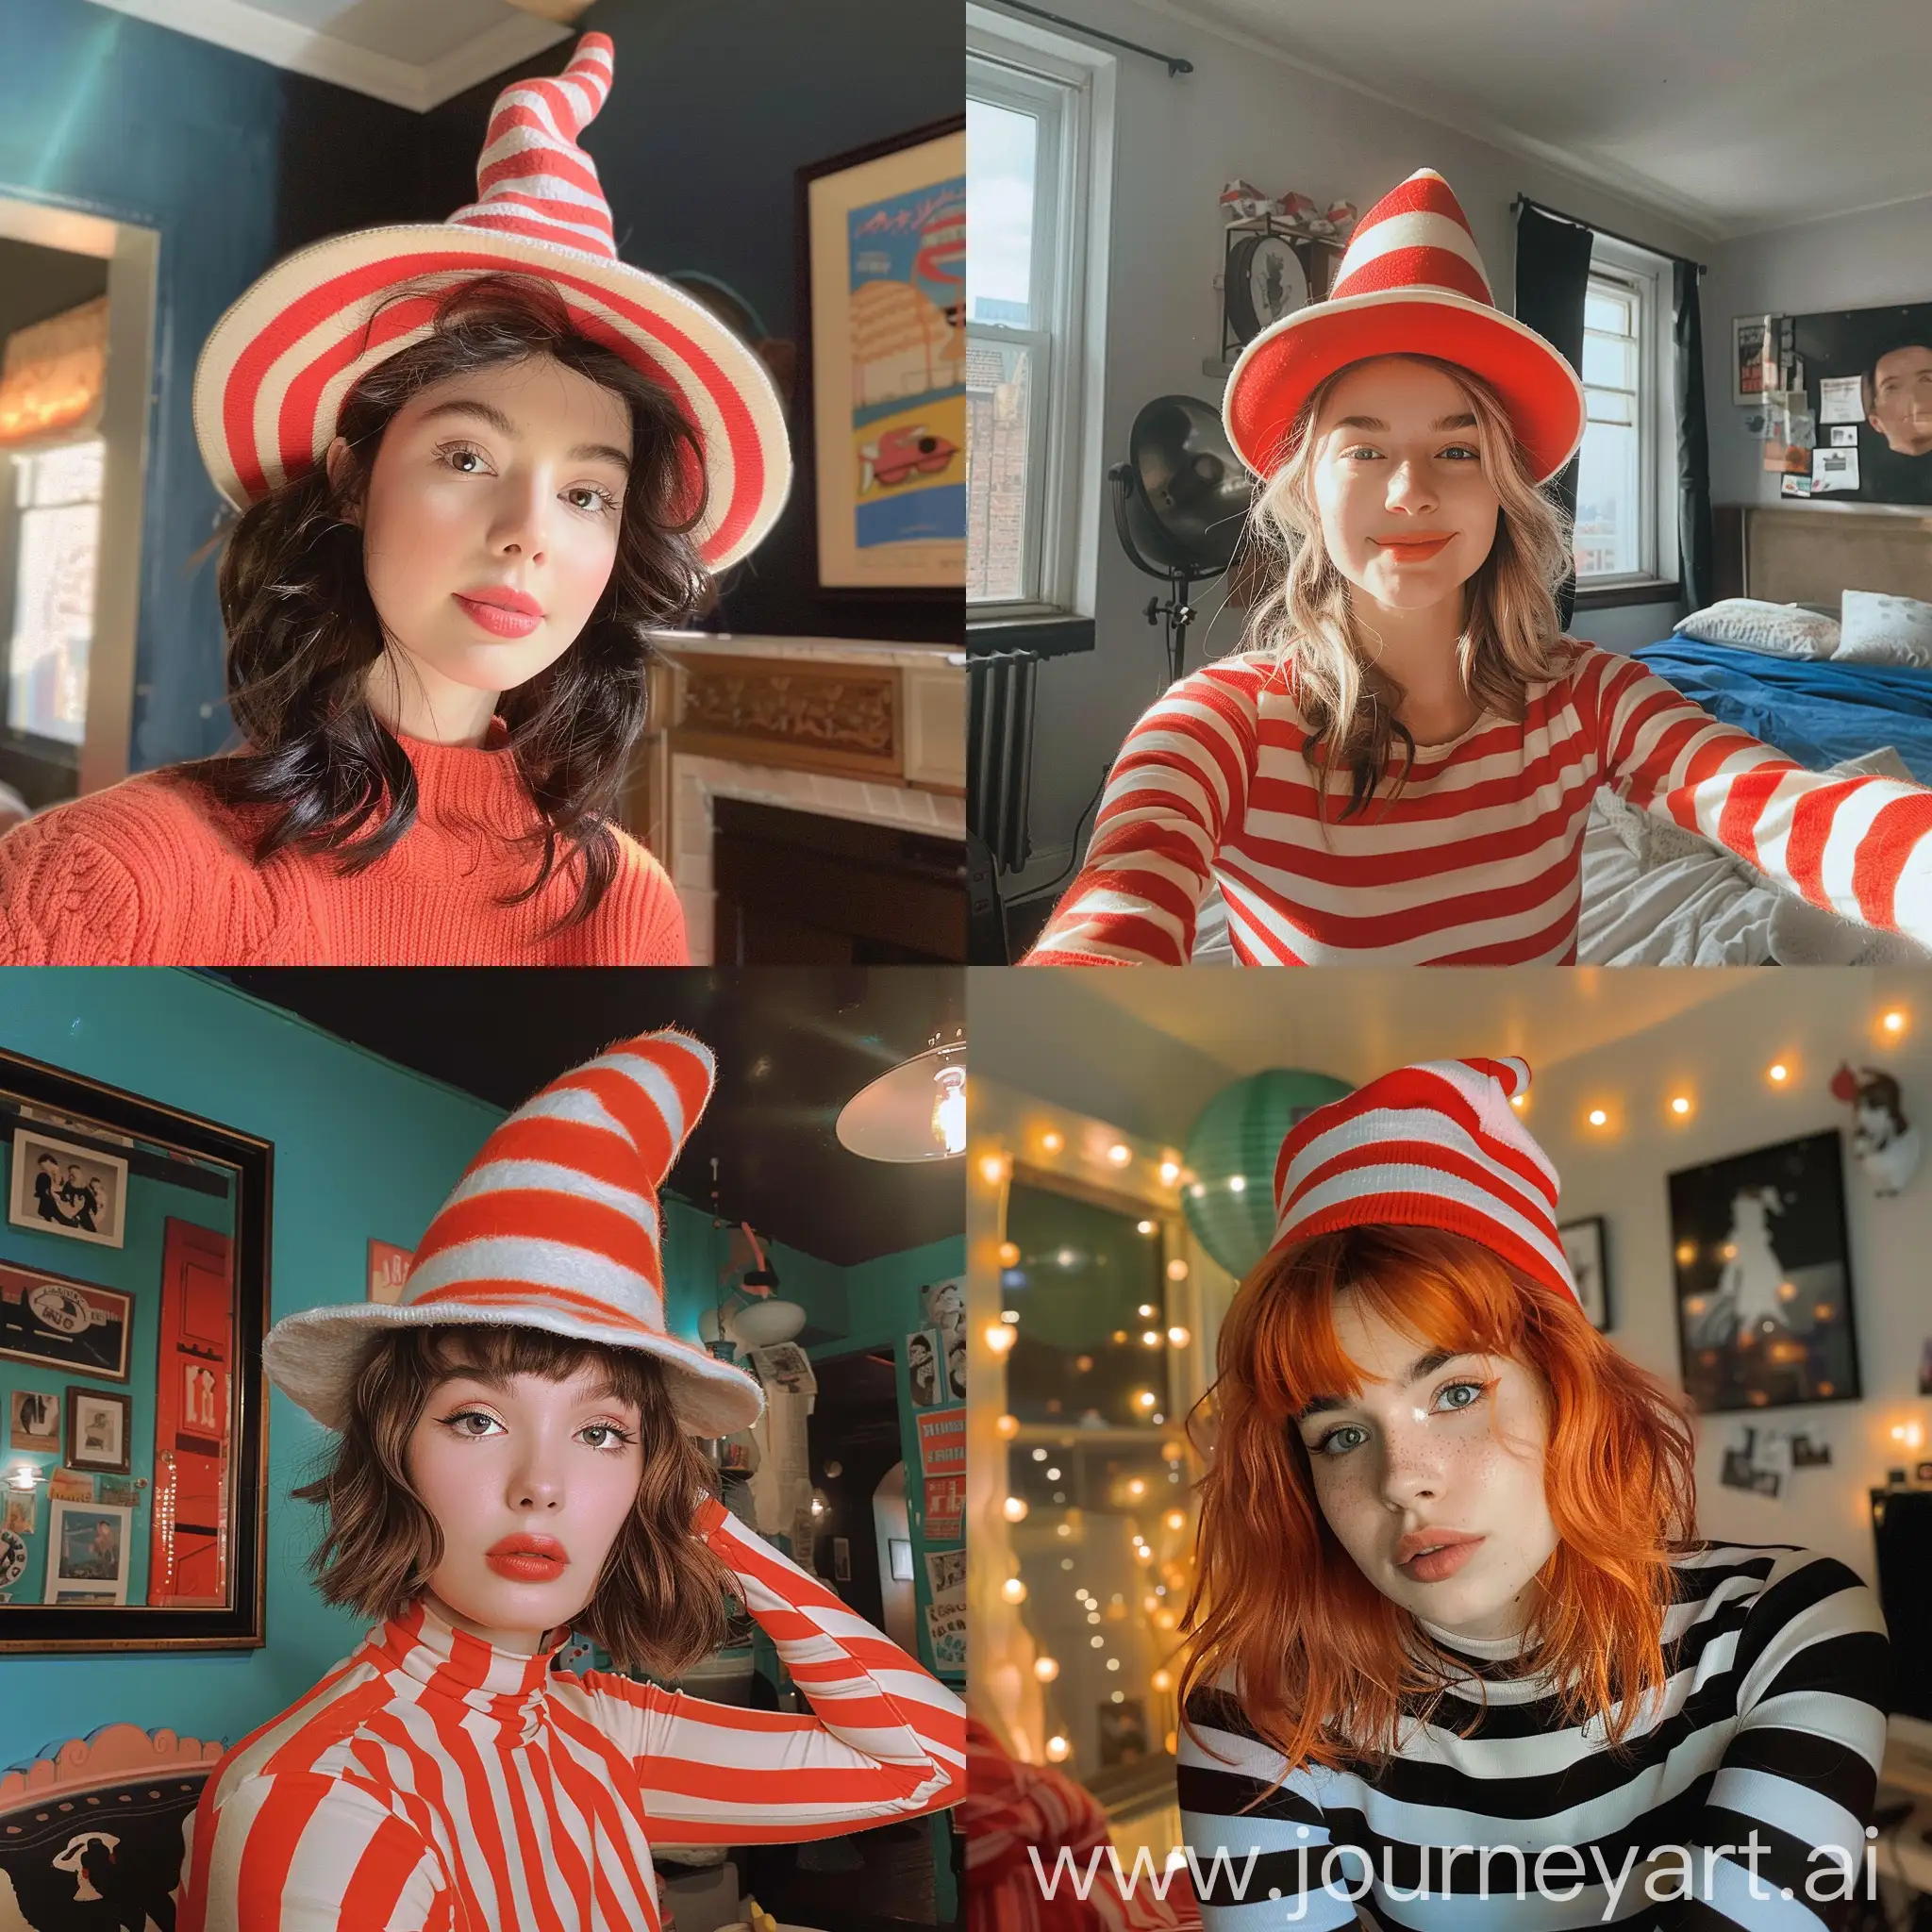 Adorable-Girl-in-NYC-Apartment-Aesthetic-Instagram-Selfie-Inspired-by-Cat-in-the-Hat-Movie